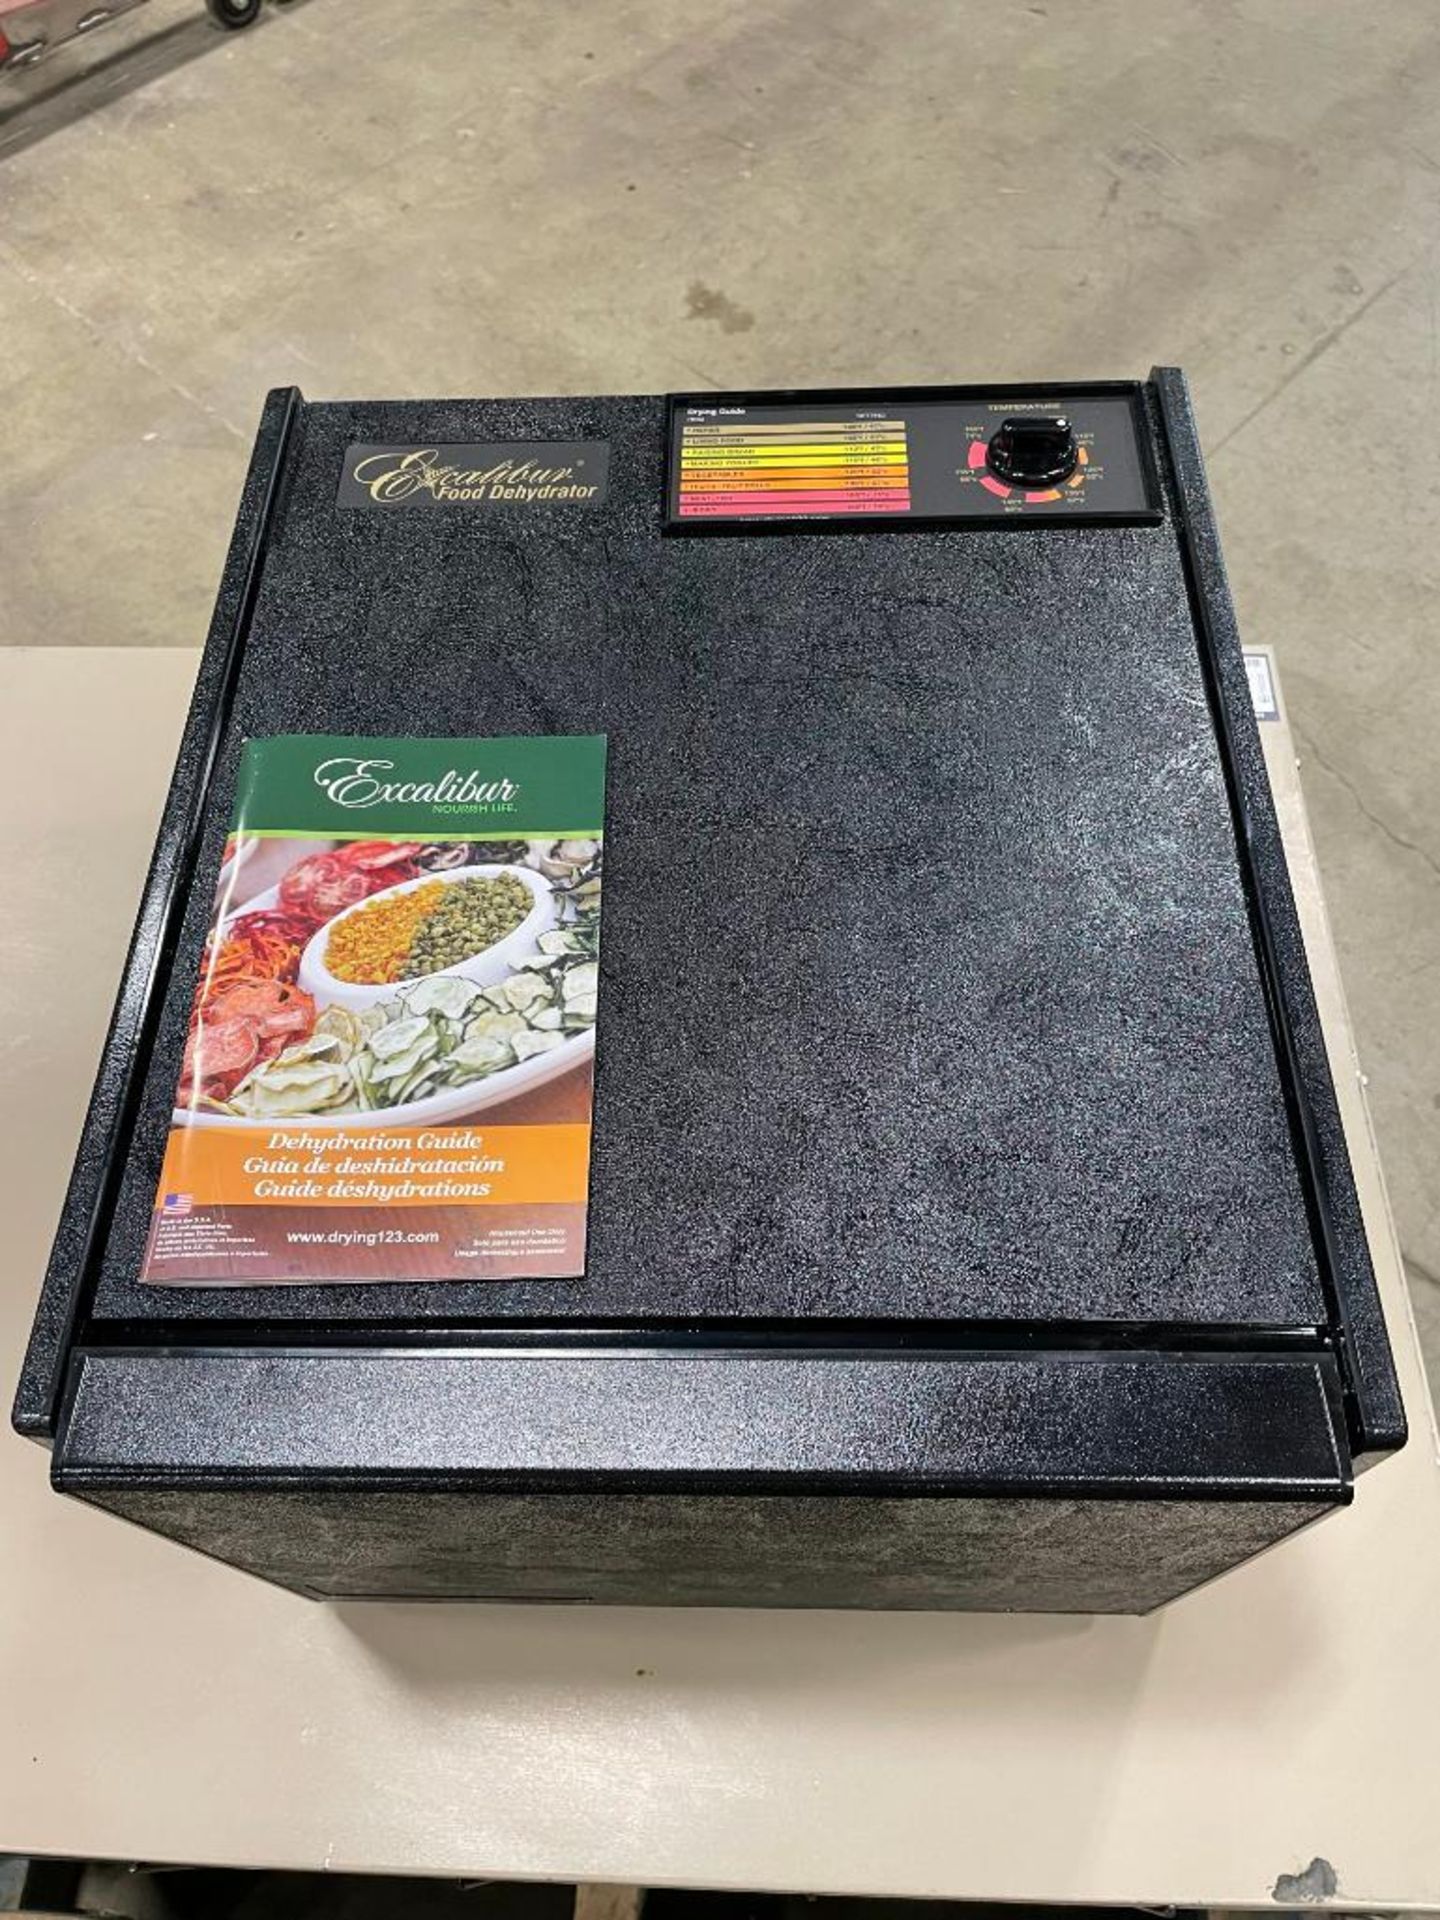 COMMERCIAL EXCALIBUR DEHYDRATOR - Image 4 of 14